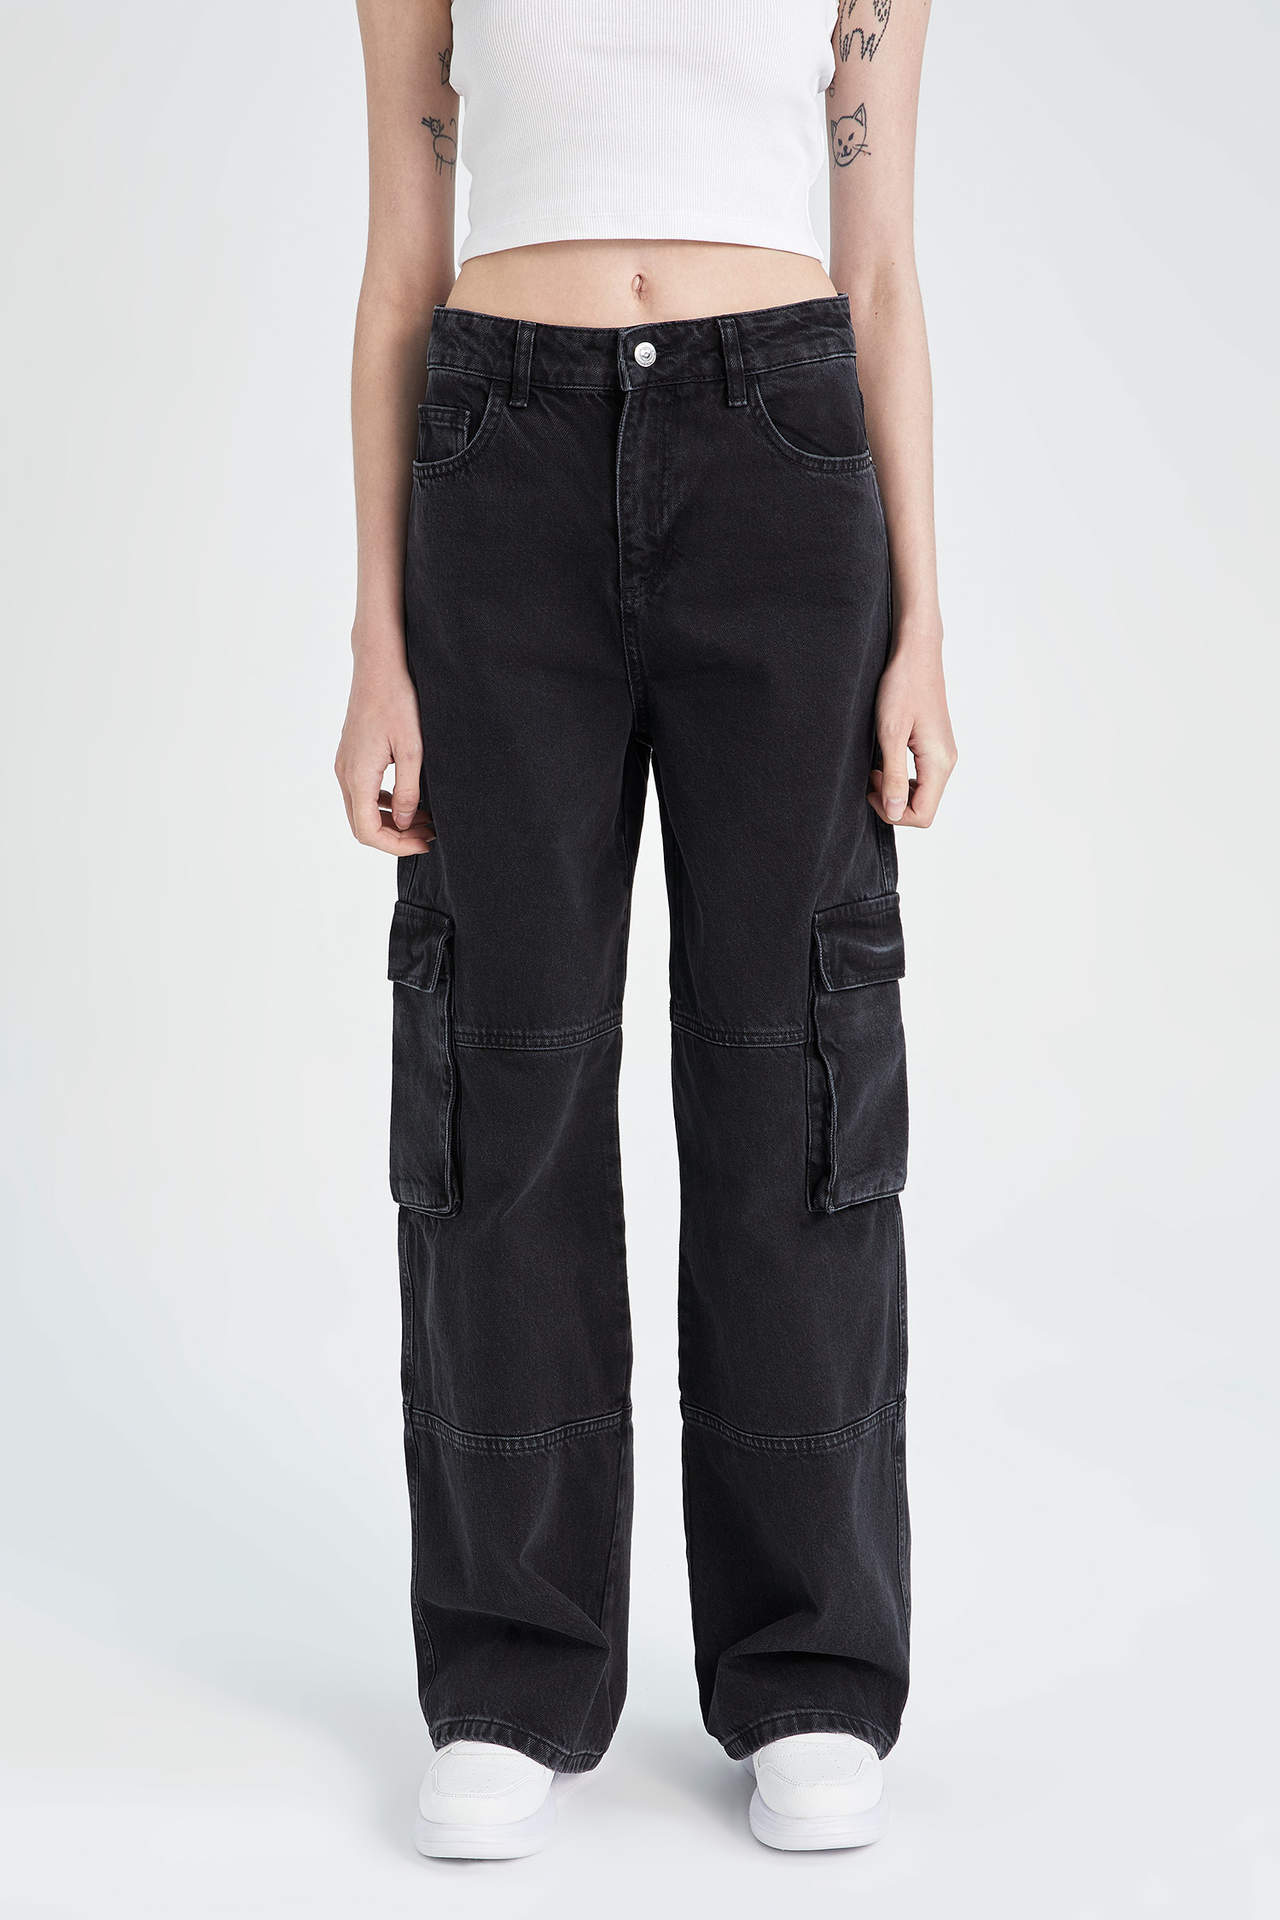 DEFACTO Straight Fit Cargo Pants